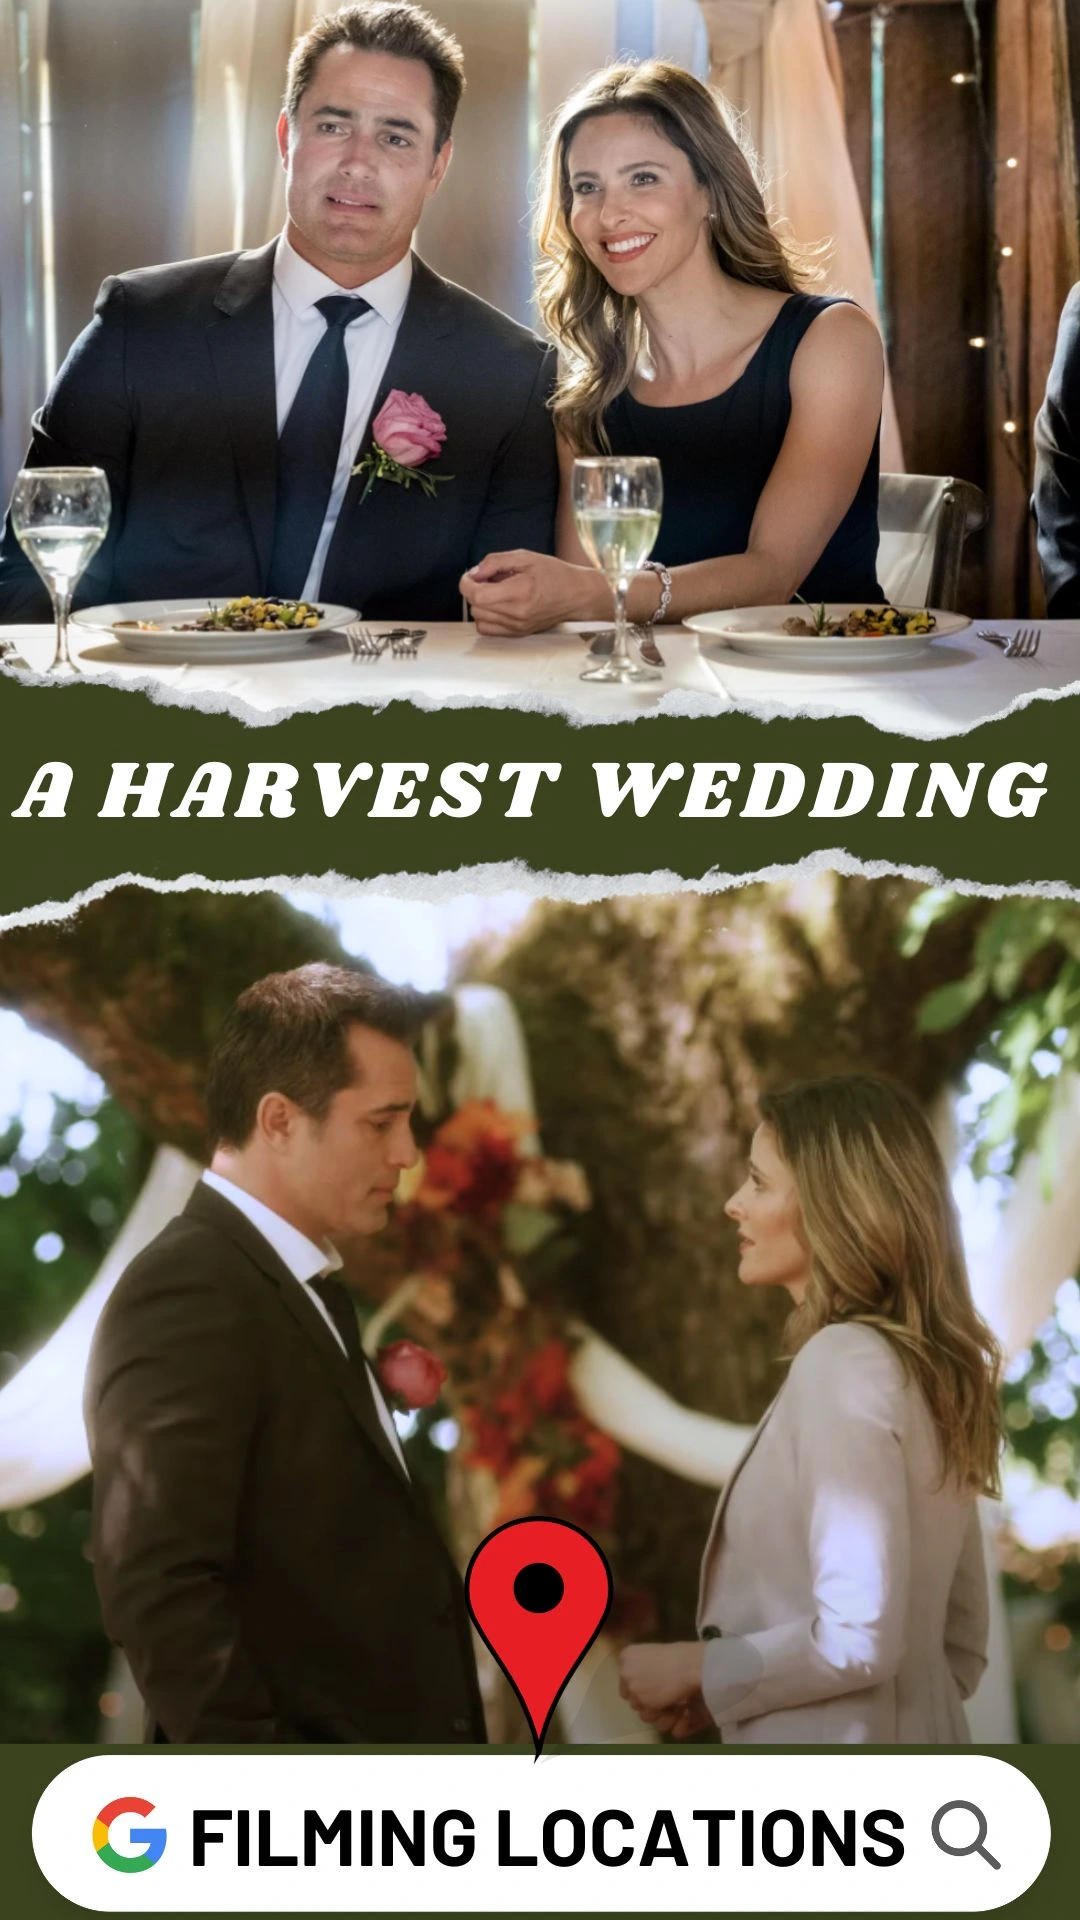 A Harvest Wedding Filming Locations